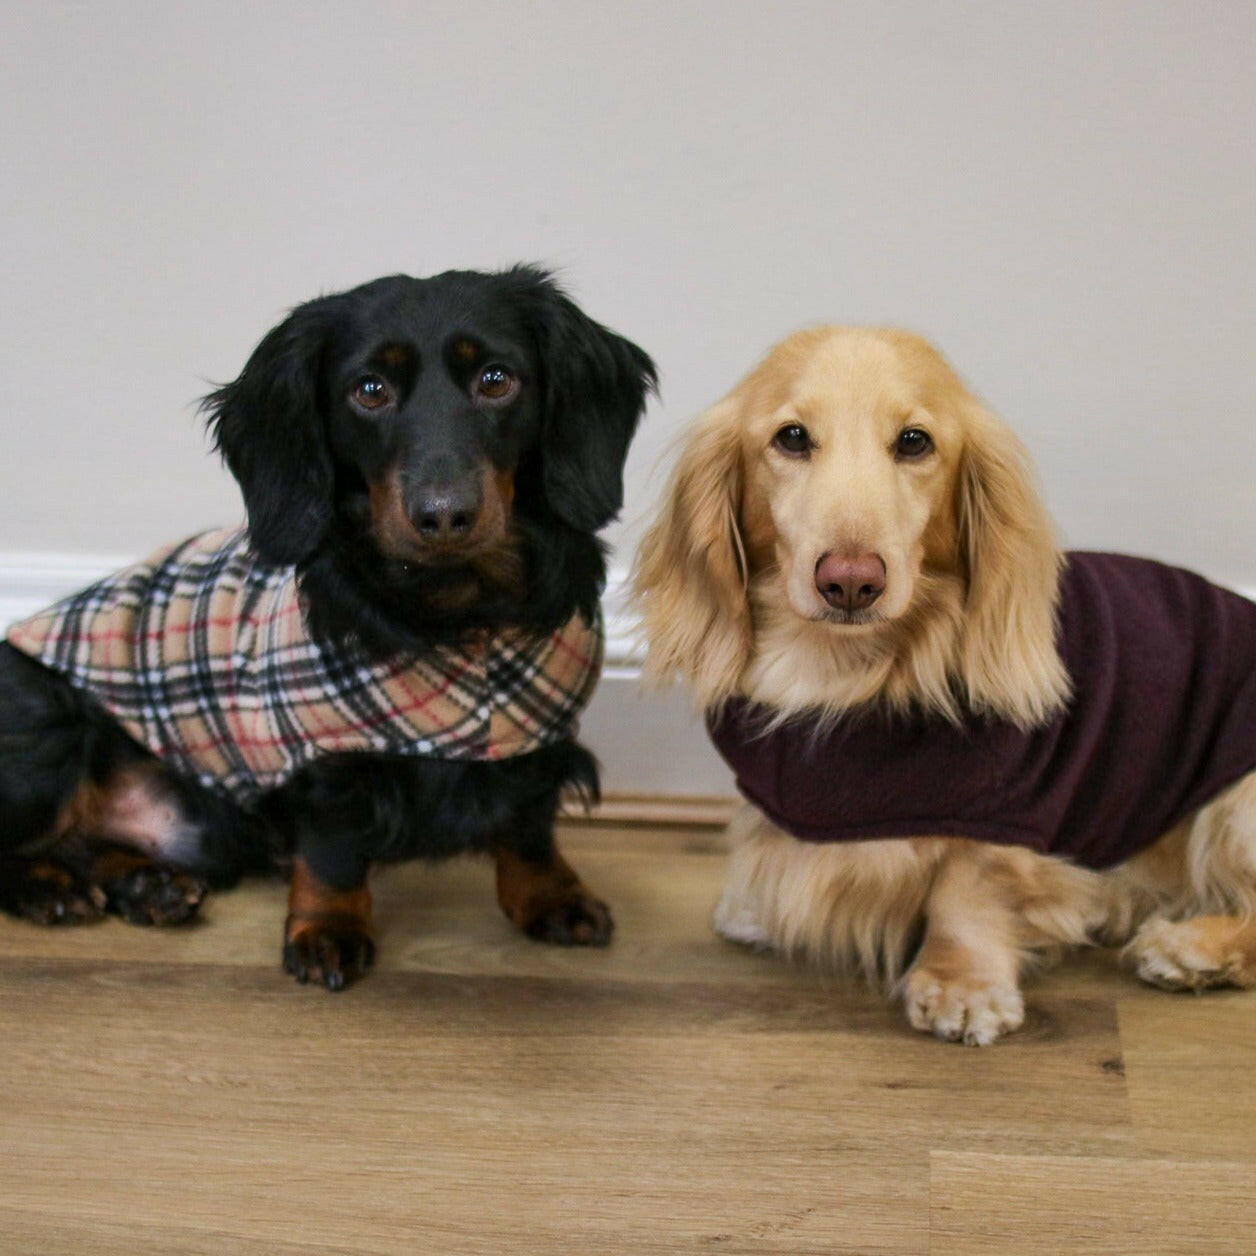 The Simple Snuggle Jumper ® - Hugo and Ted